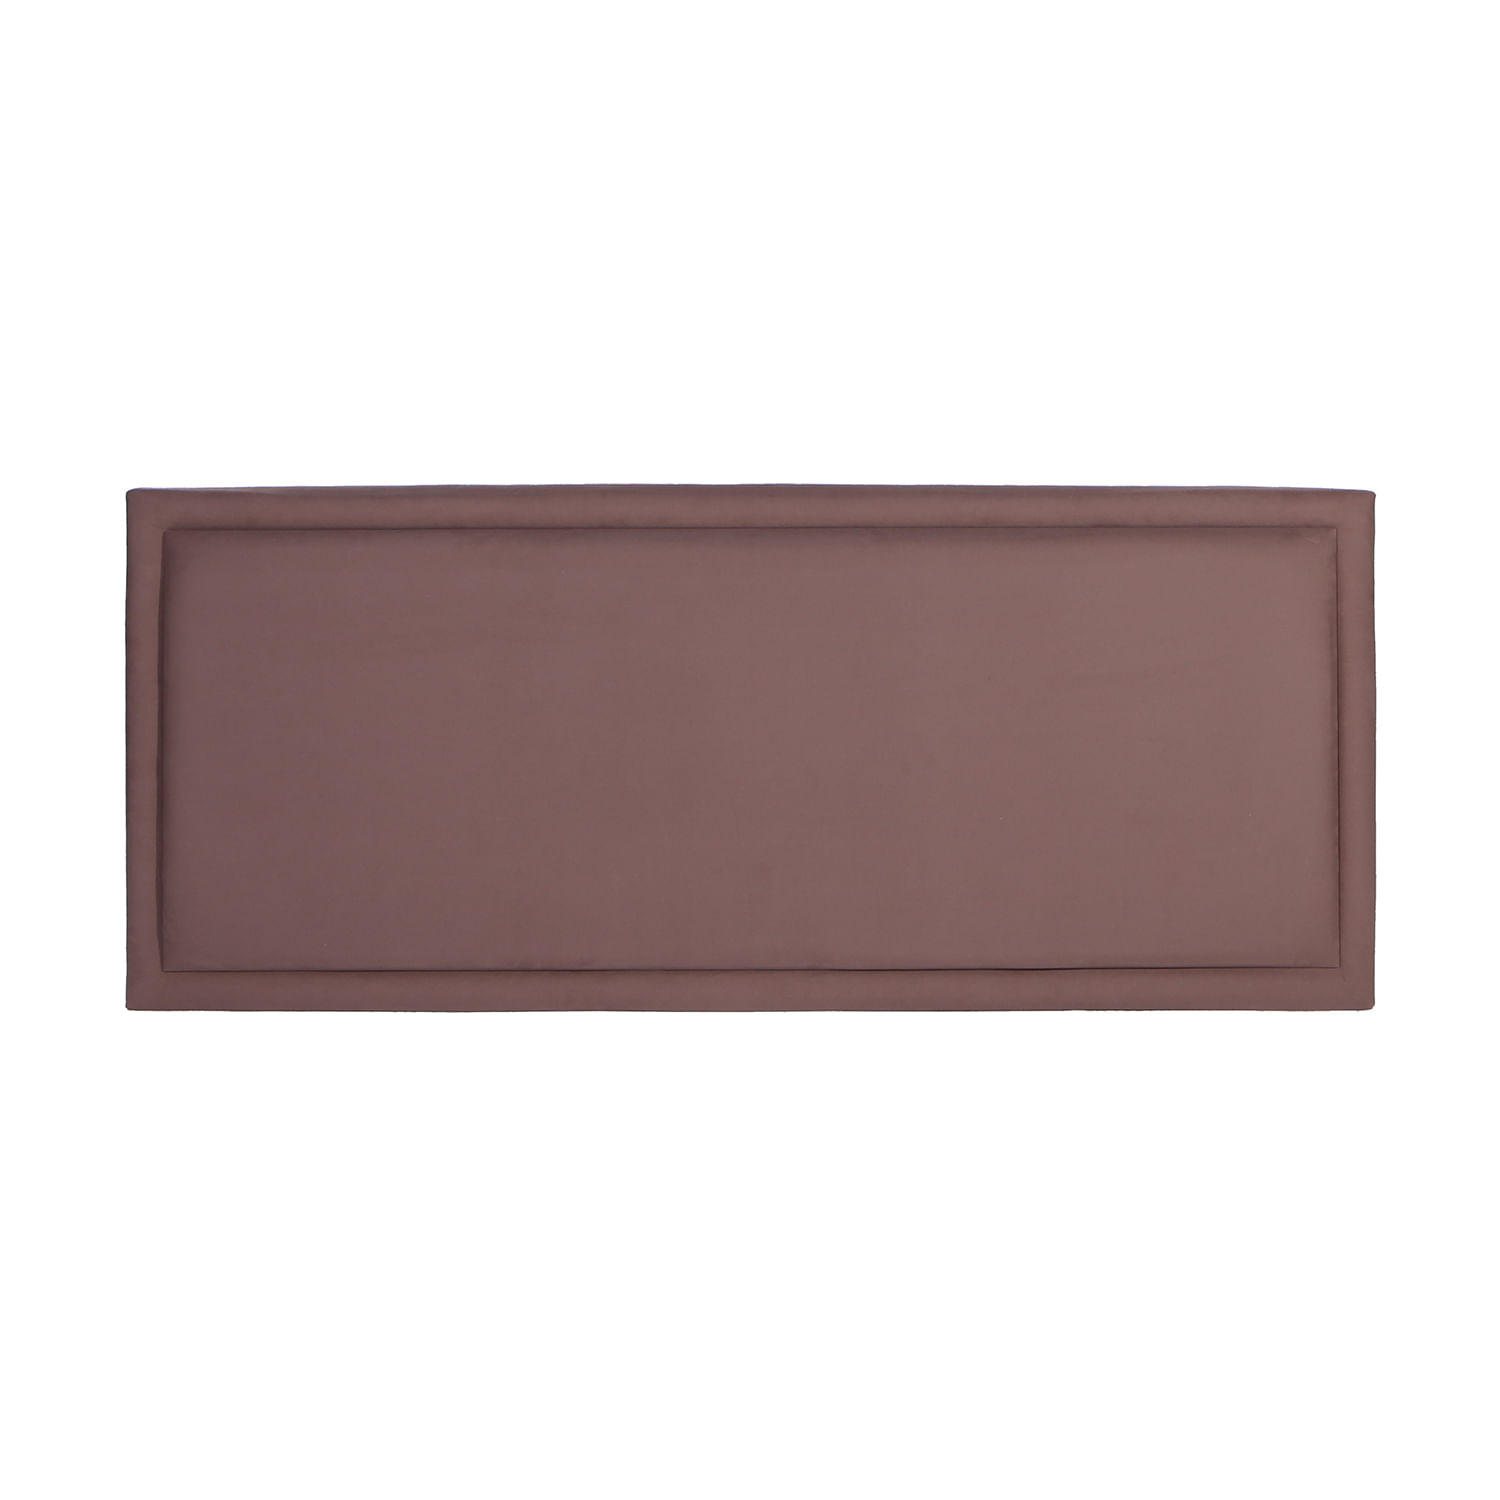 Painel-Joa-Suede-Chocolate-Casal